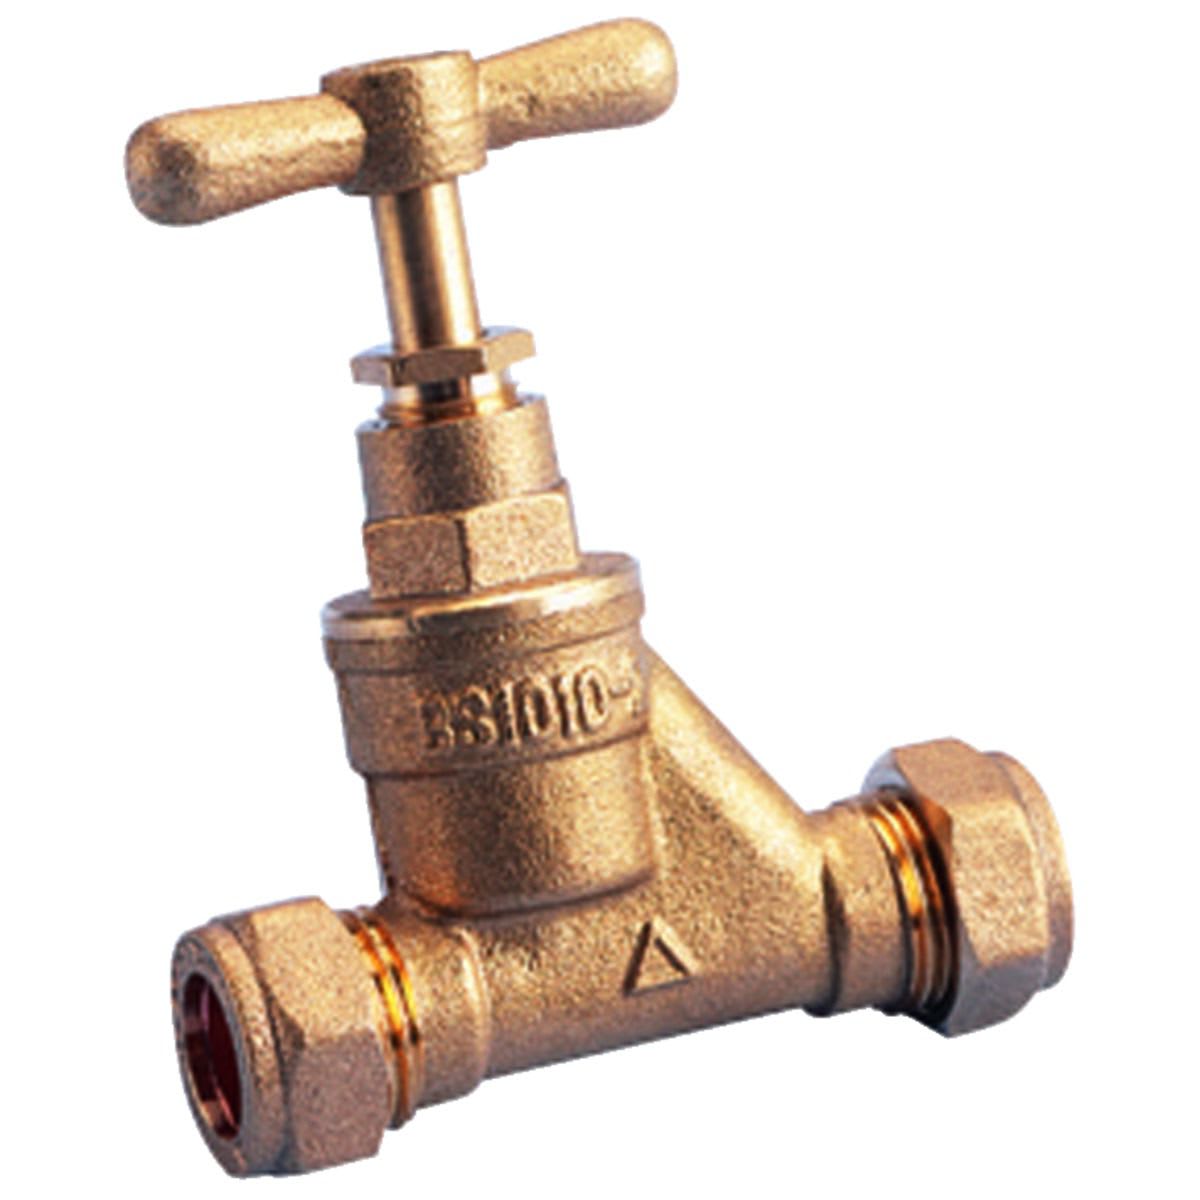 Primaflow Brass Compression Stop Cock - 15mm